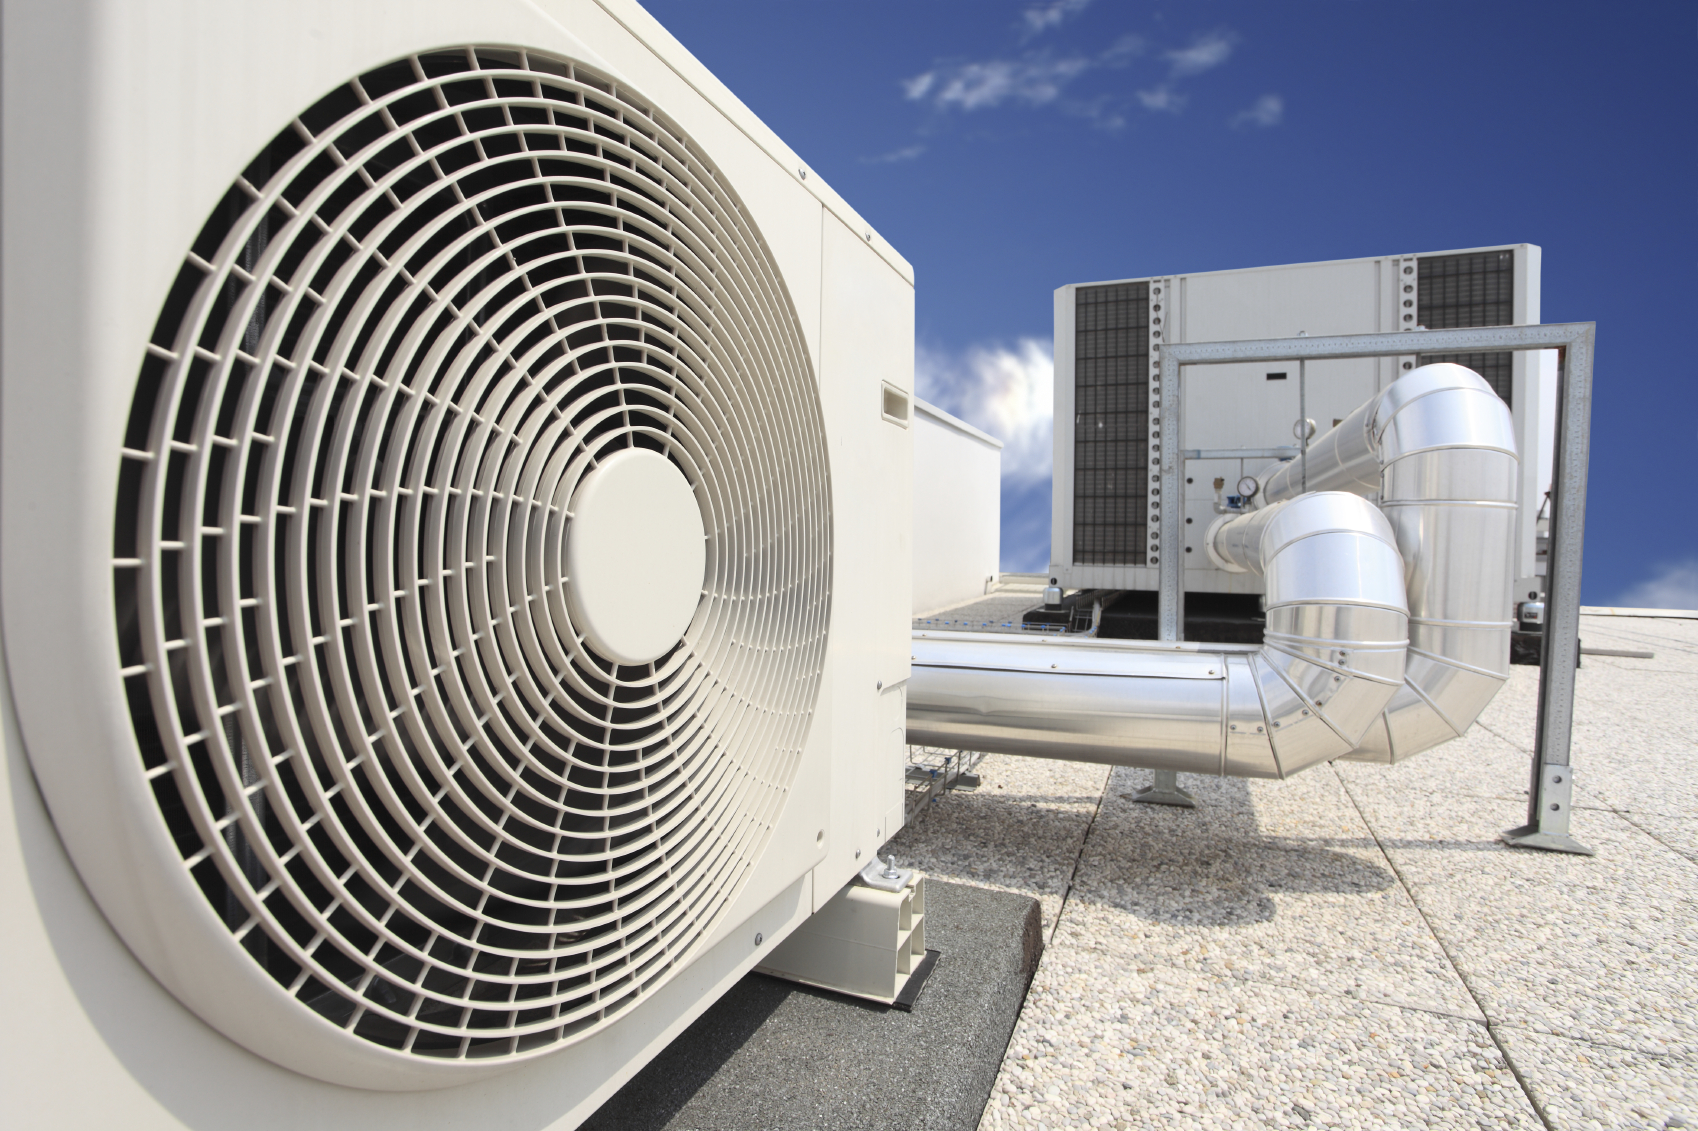 World Air Conditioning Instruments Market 2020 Trade Outlook – CPS Merchandise, REFCO Manufacturing, Sealed Unit Components, Matco Instruments – KSU